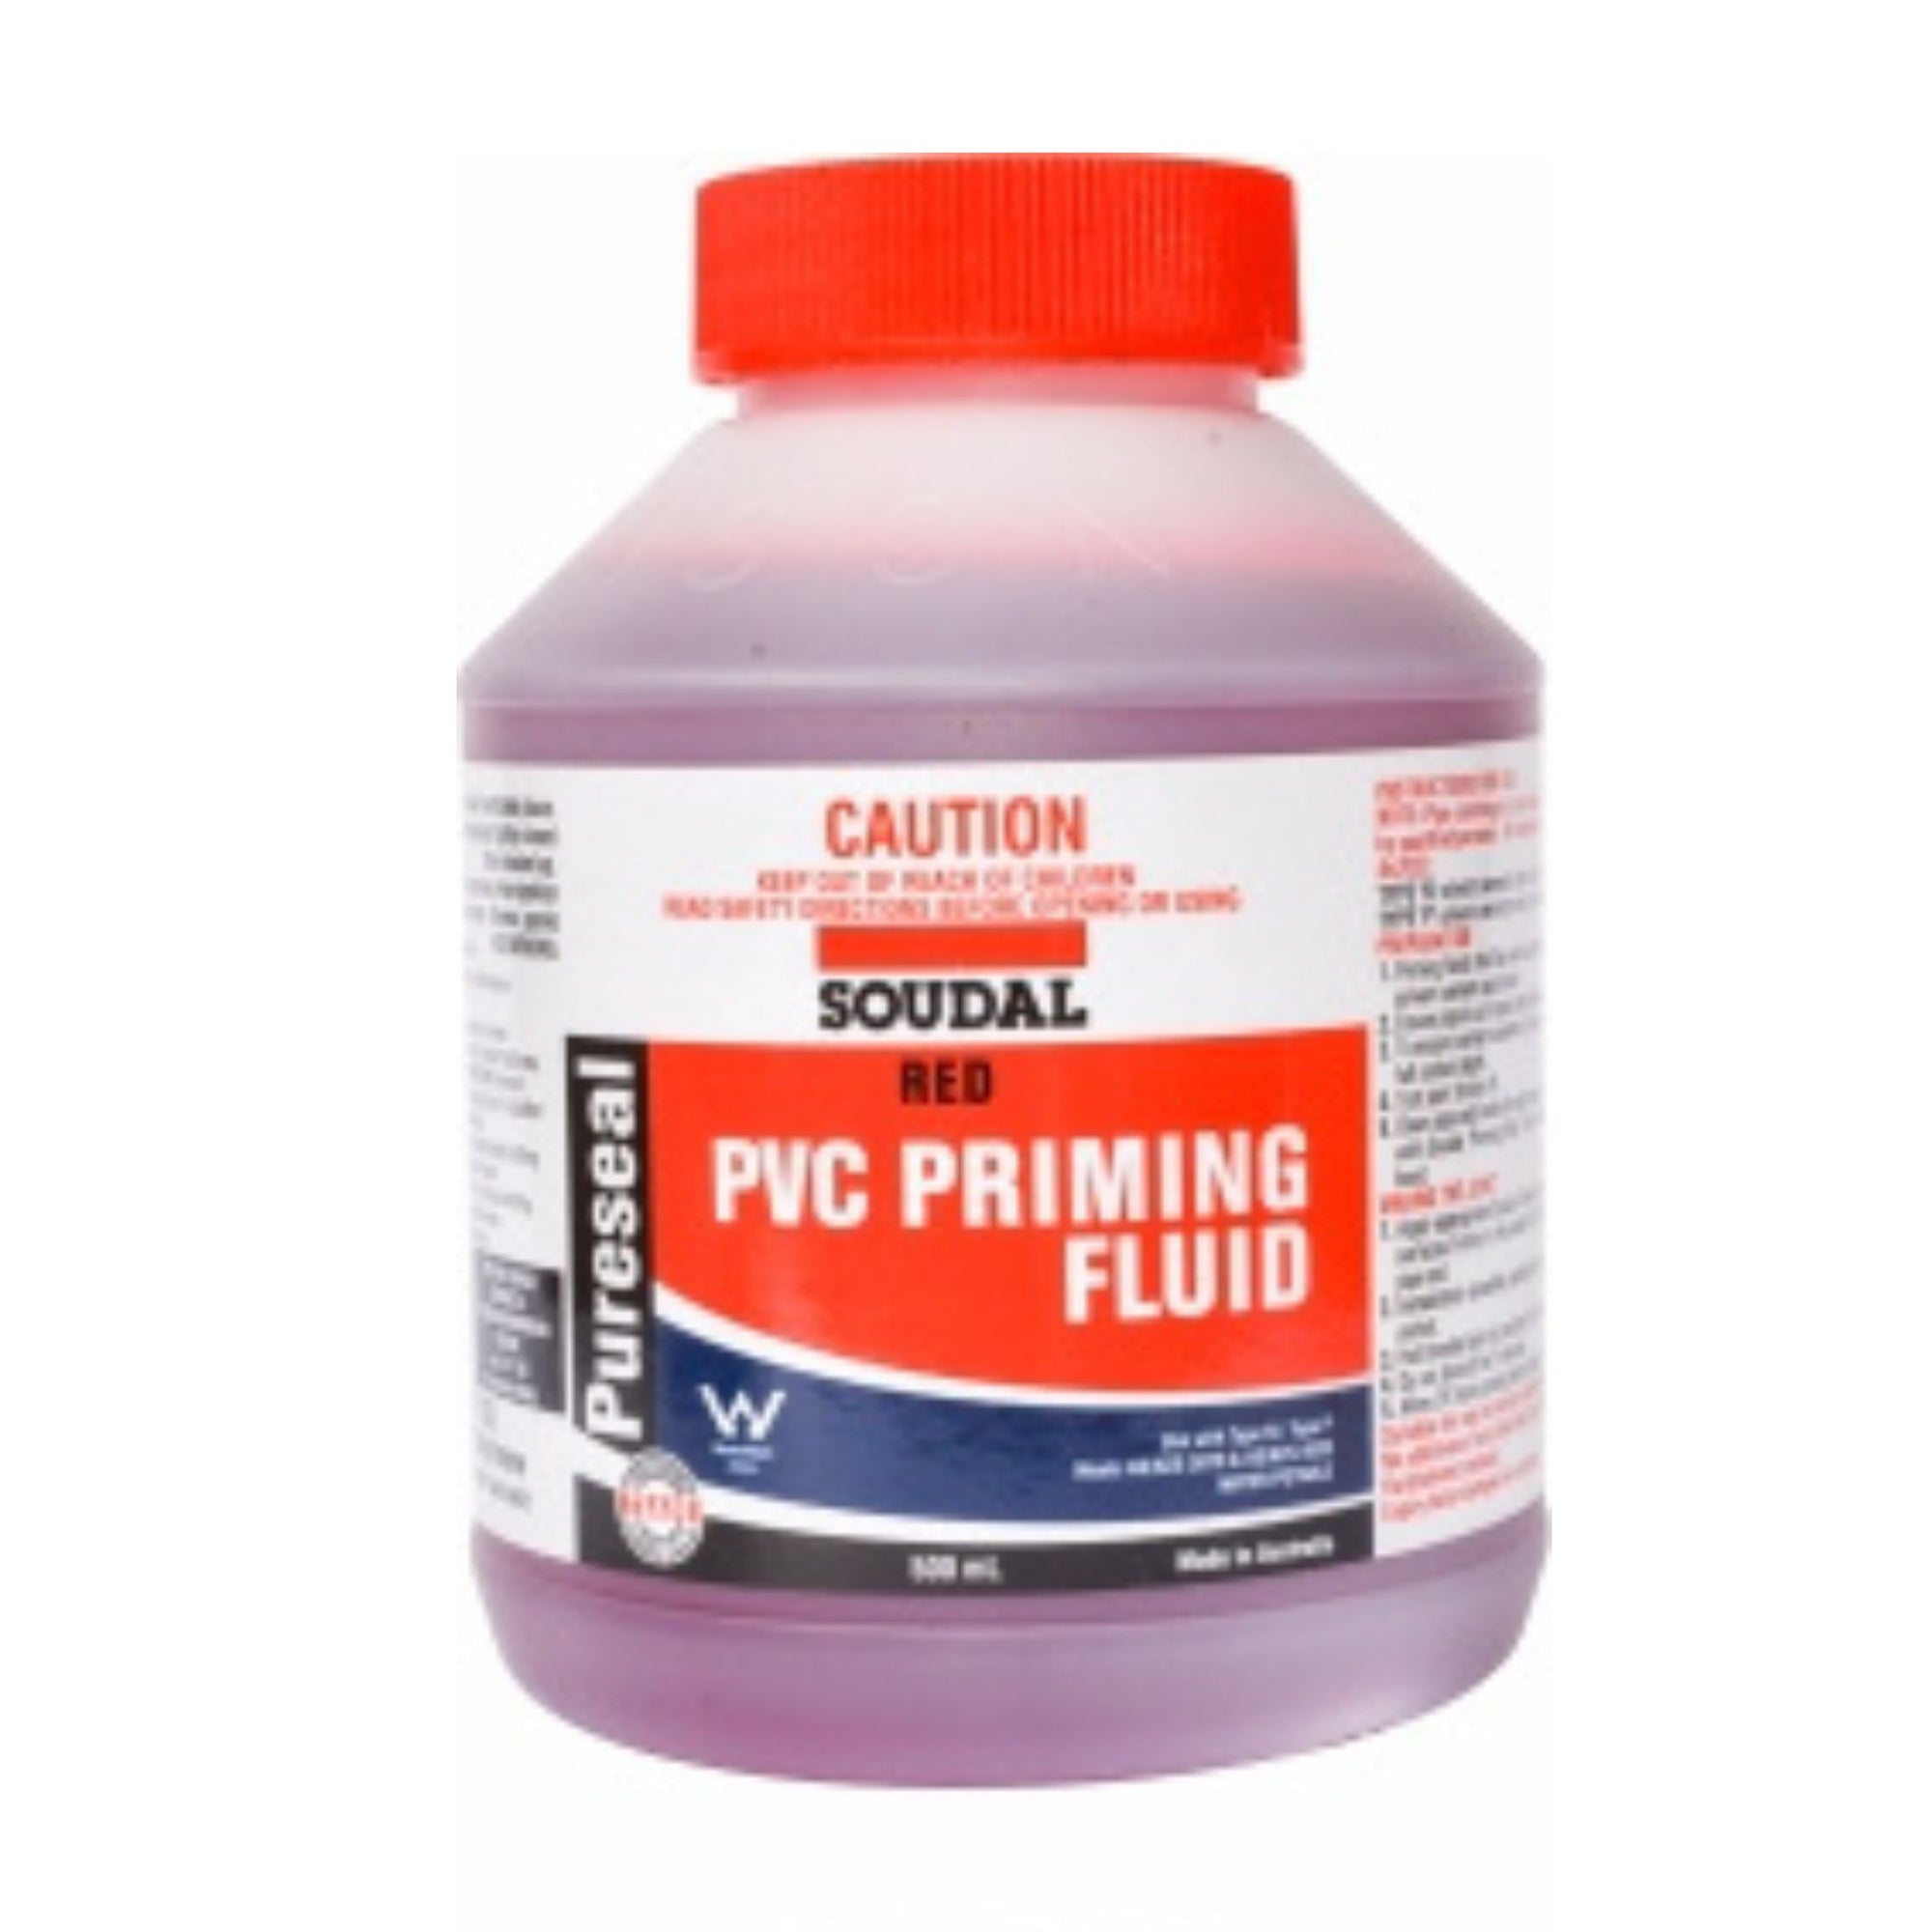 Soudal Purseal PVC Priming Fluid Red - South East Clearance Centre